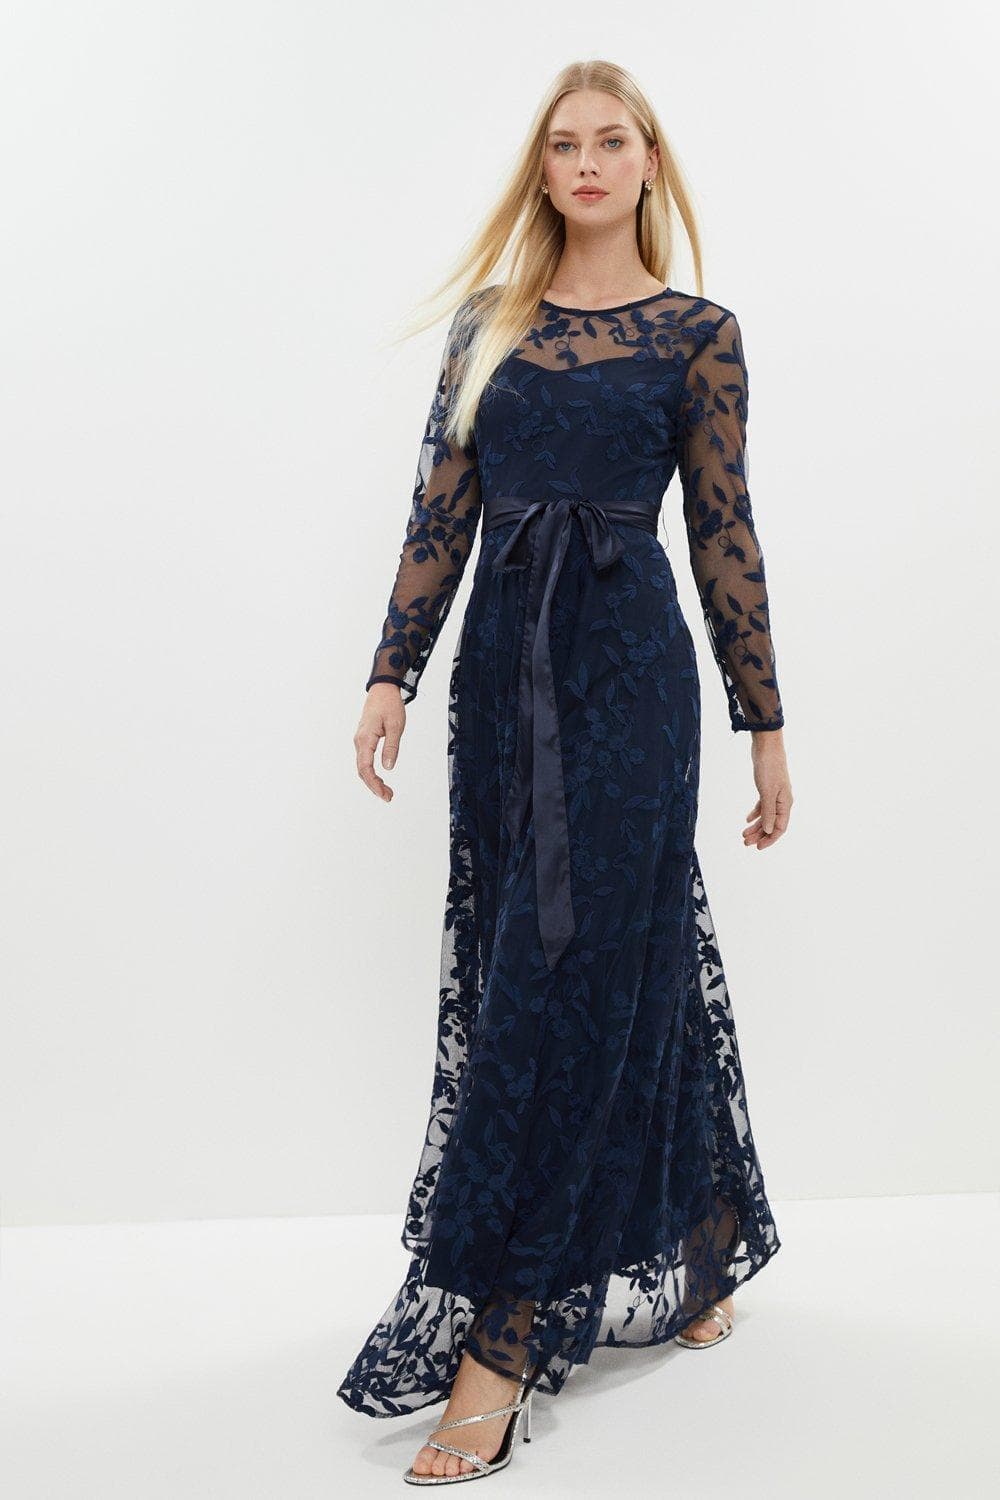 all lace navy dress with slip and fabric belt